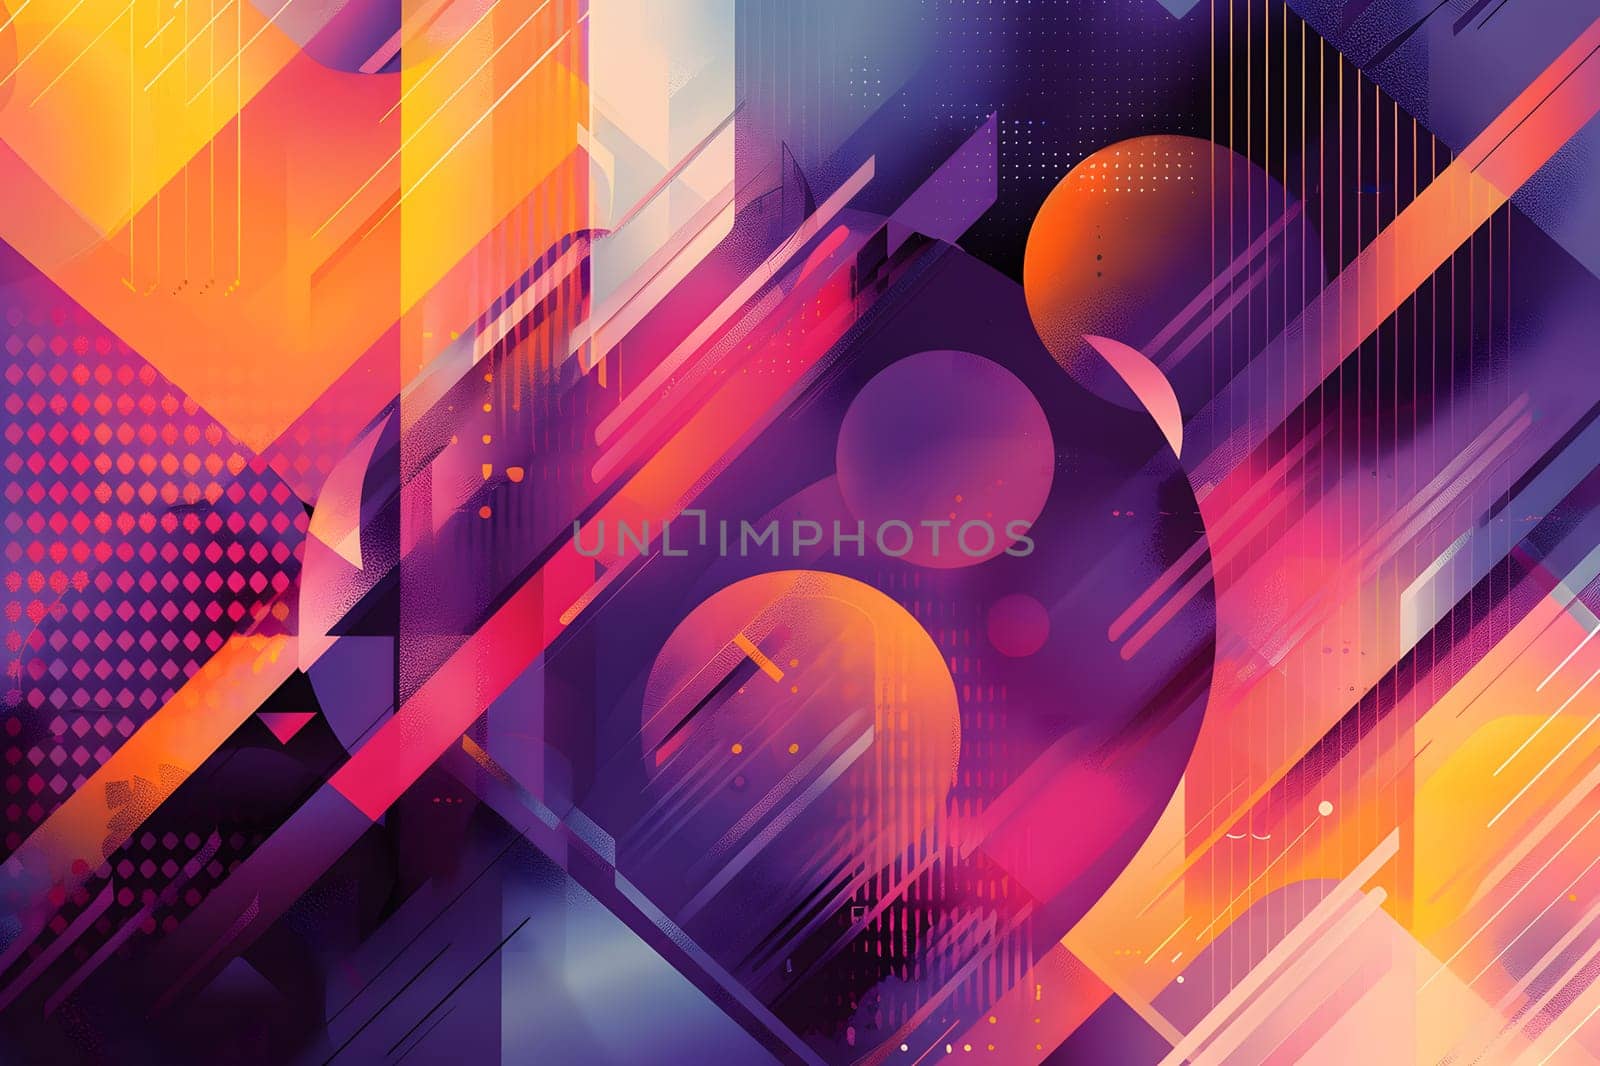 a colorful abstract background with geometric shapes and lines by Nadtochiy